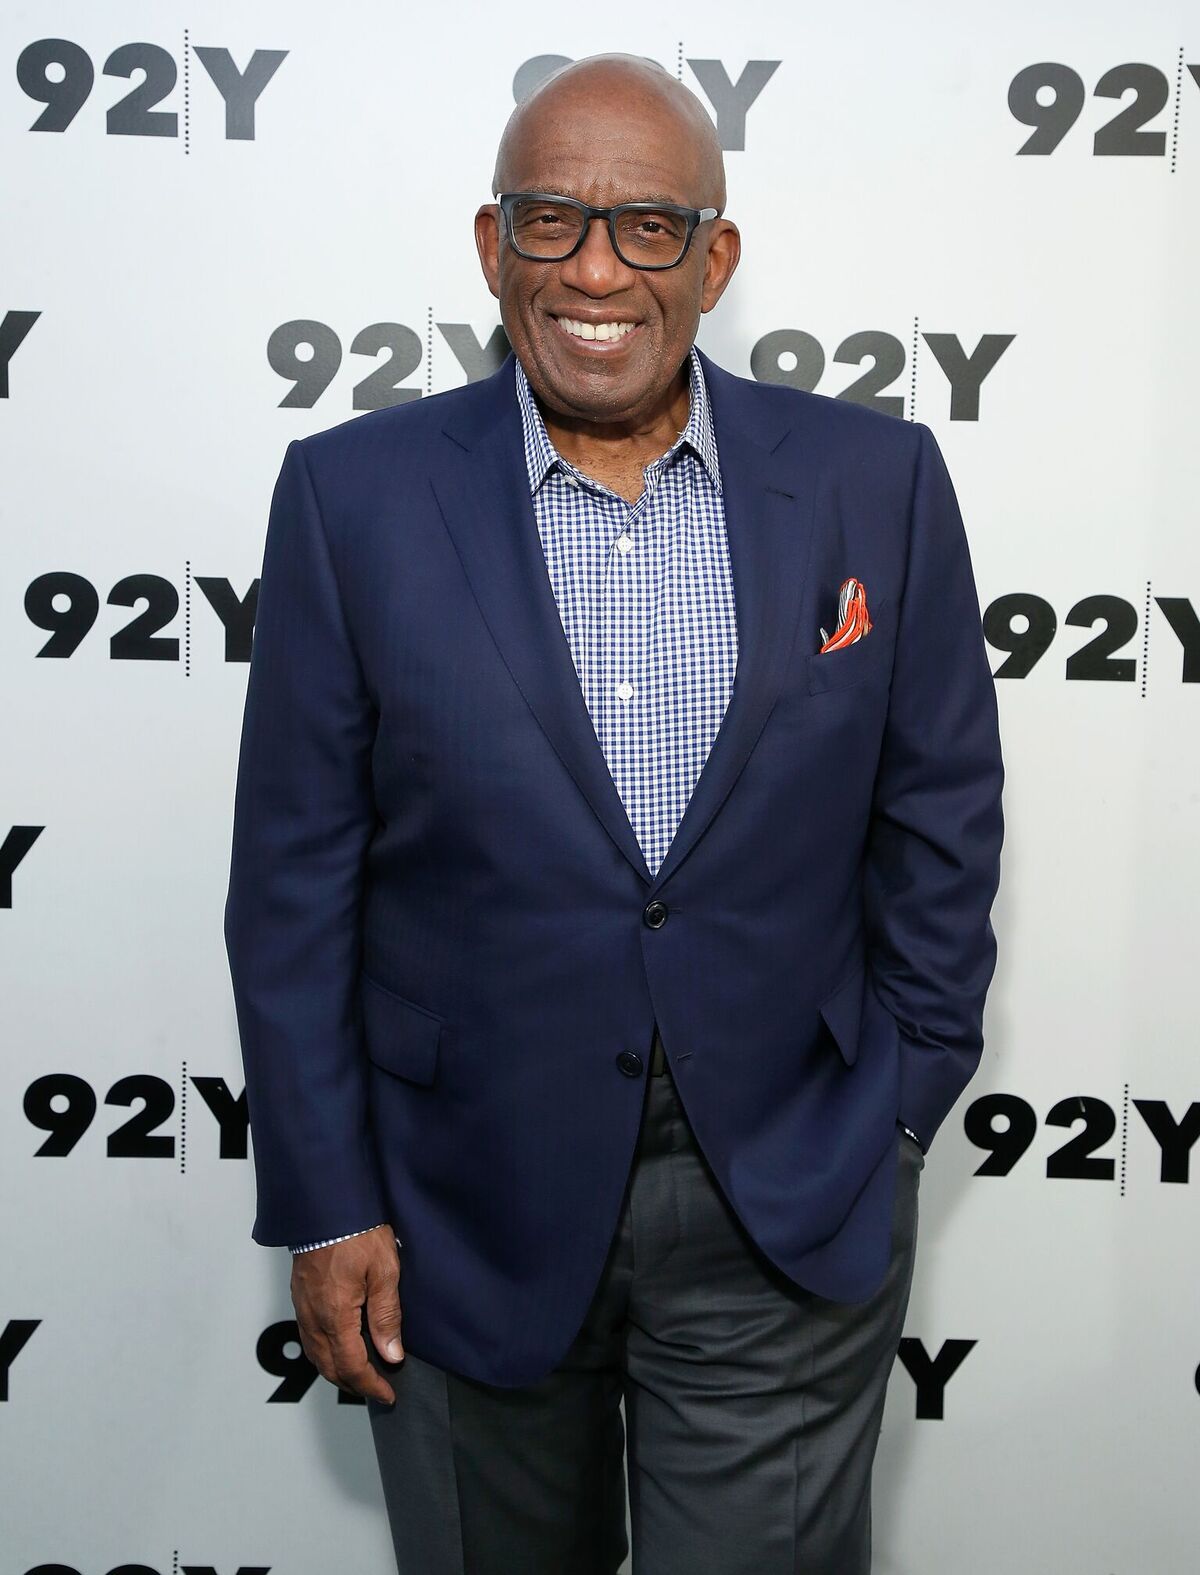 Al Roker attends the Natalie Morales in conversation with Al Roker event at 92nd Street Y on April 16, 2018 | Source: Getty Images